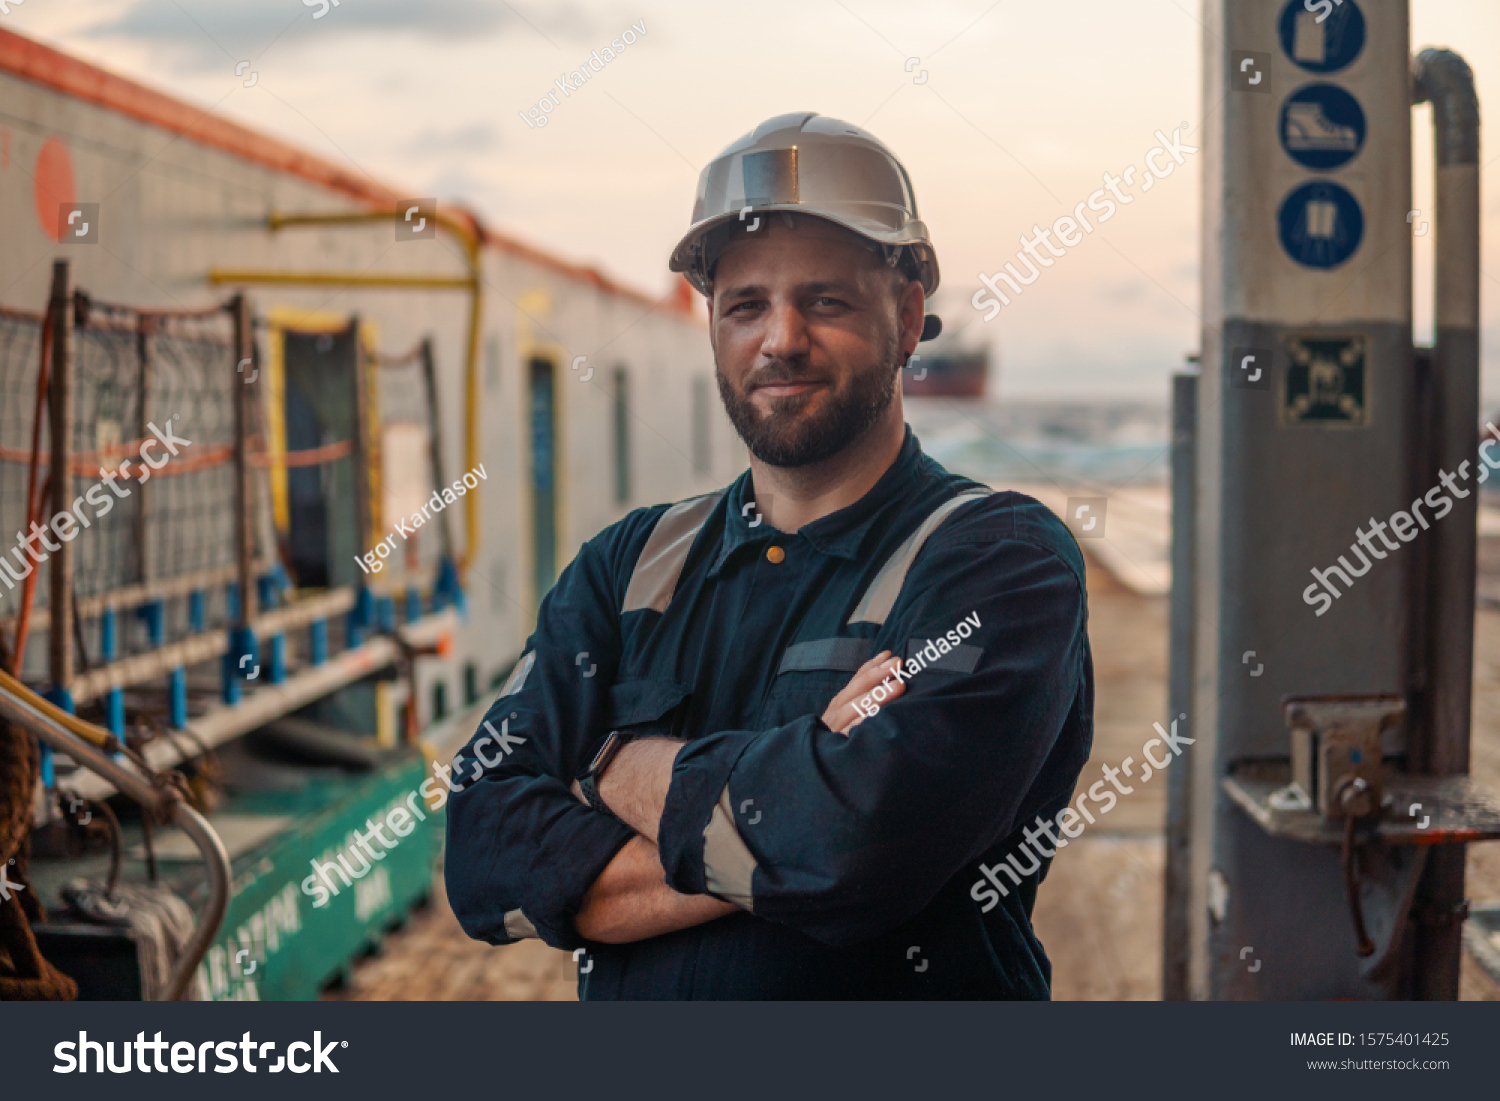 Marine Deck Officer or Chief mate on deck of offshore vessel or ship , wearing PPE personal protective equipment - helmet, coverall #1575401425